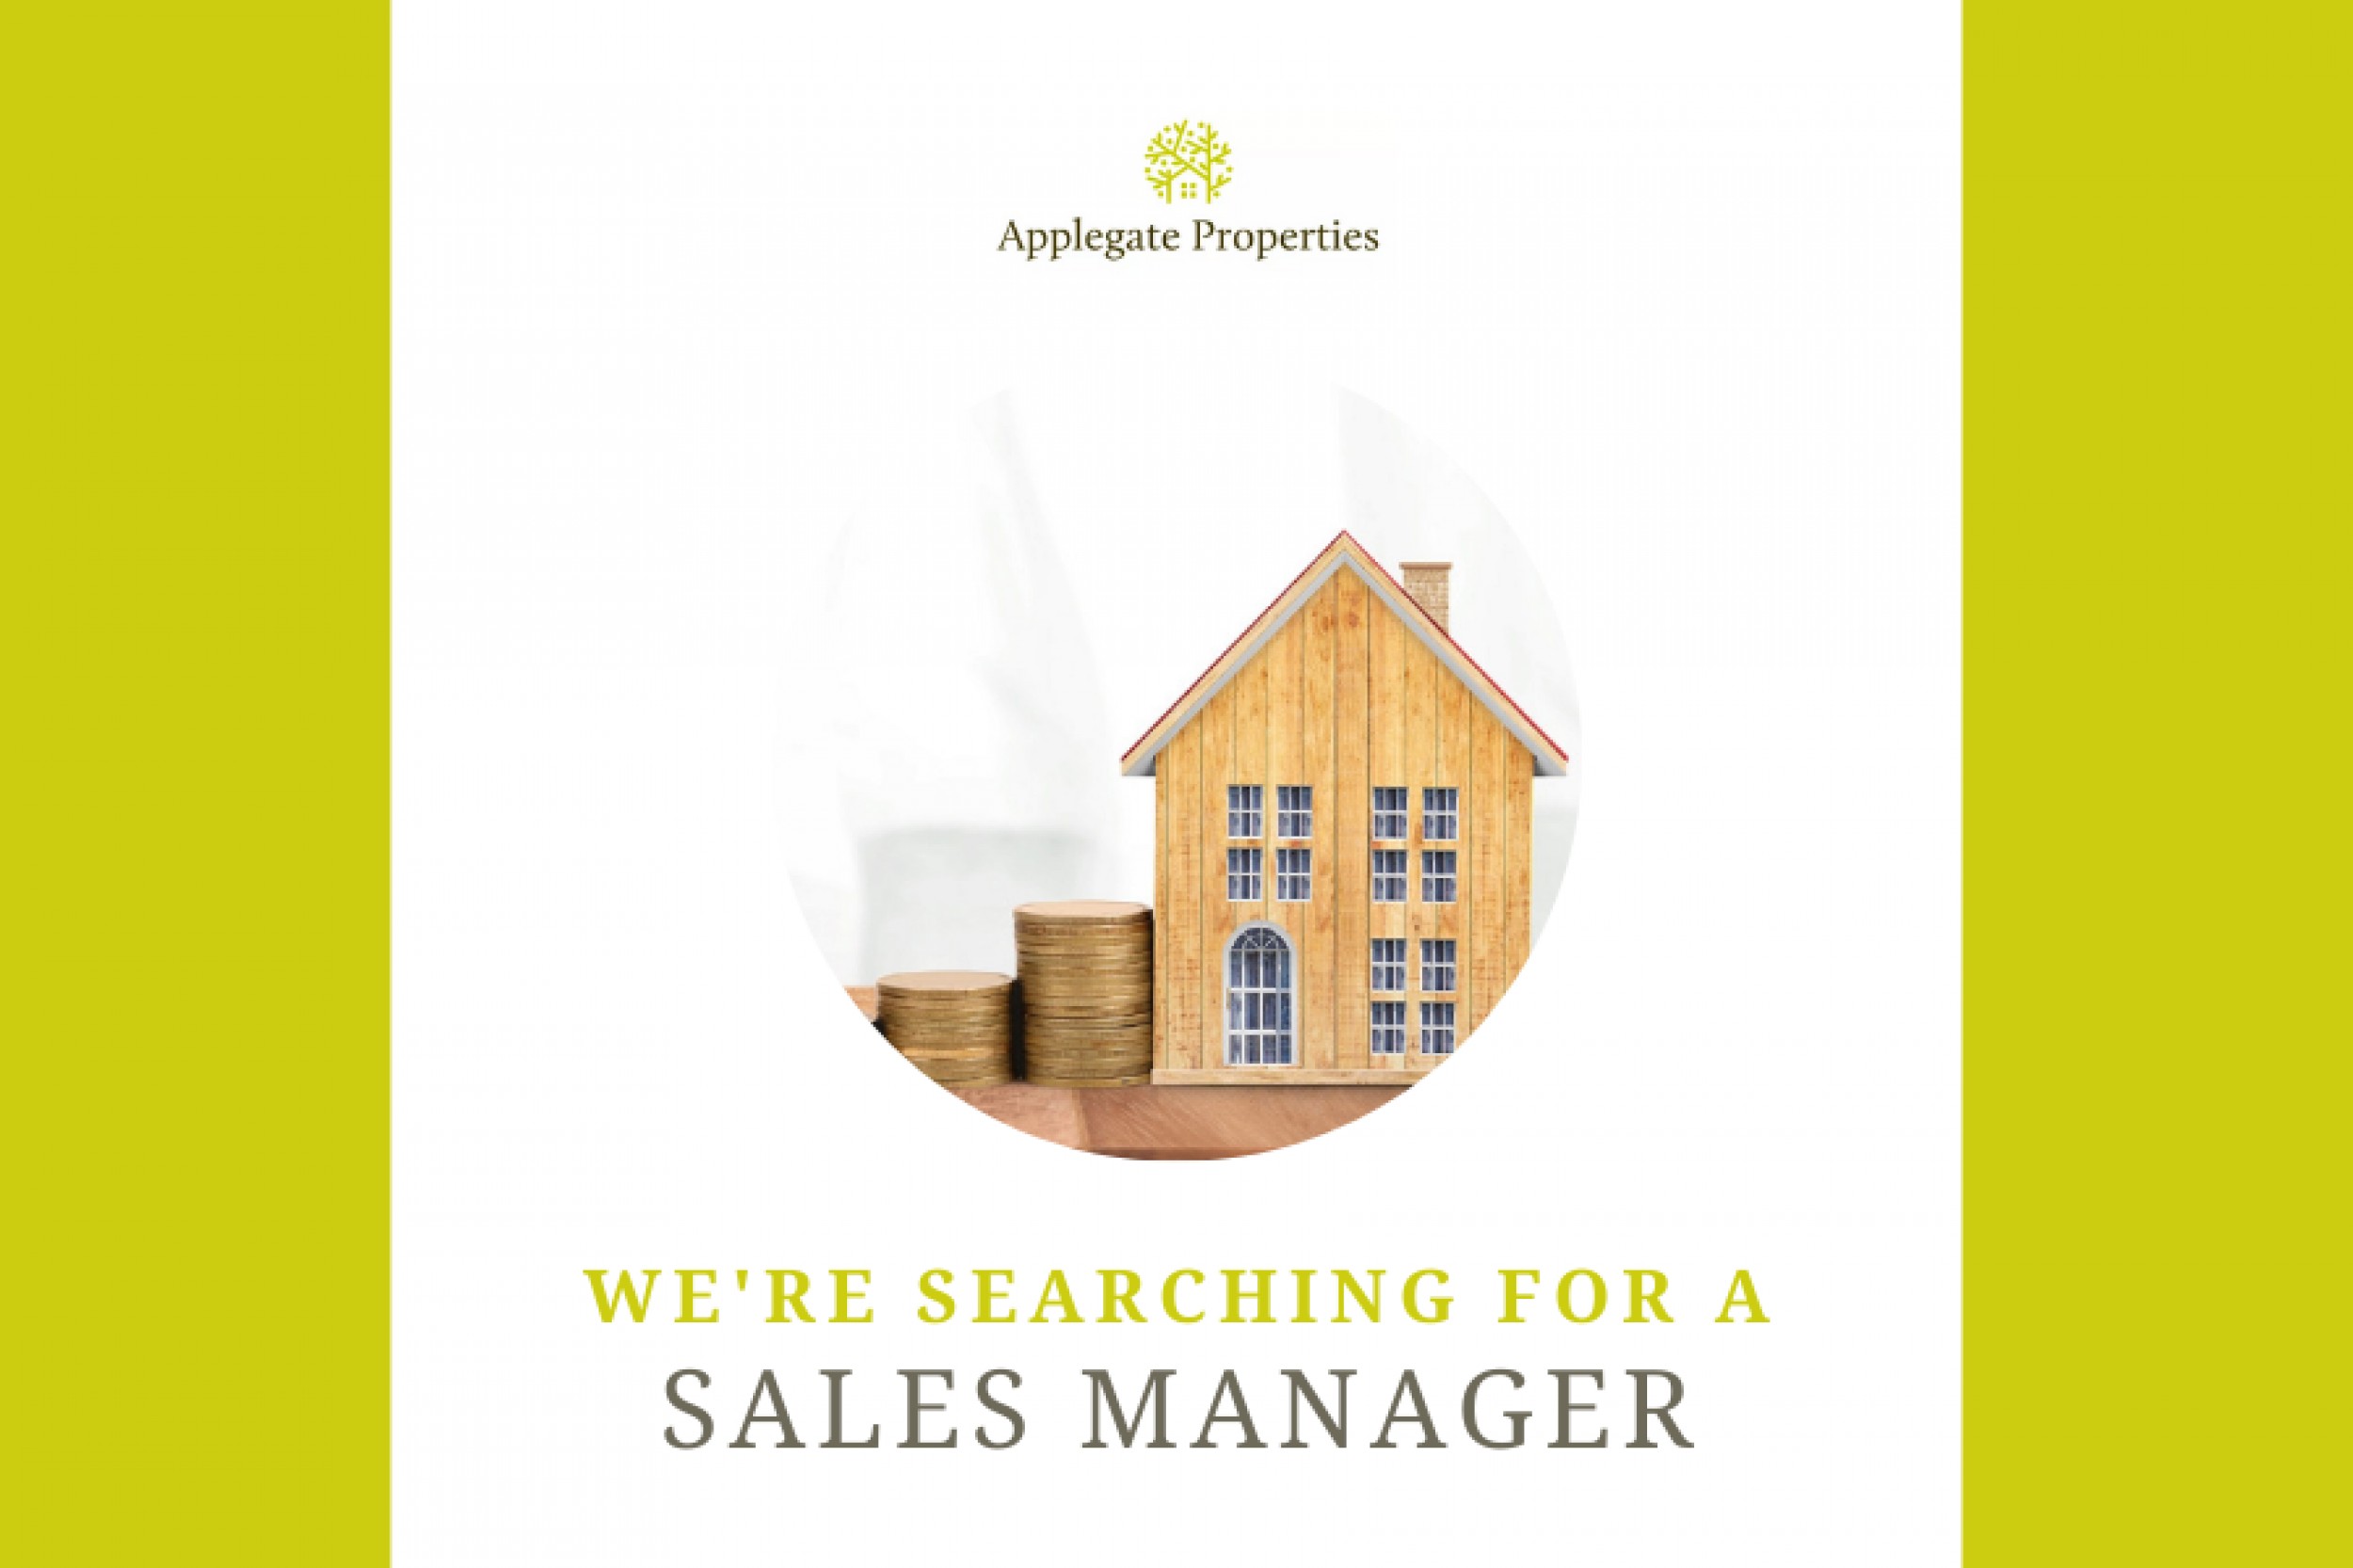 We're searching for a sales manager 